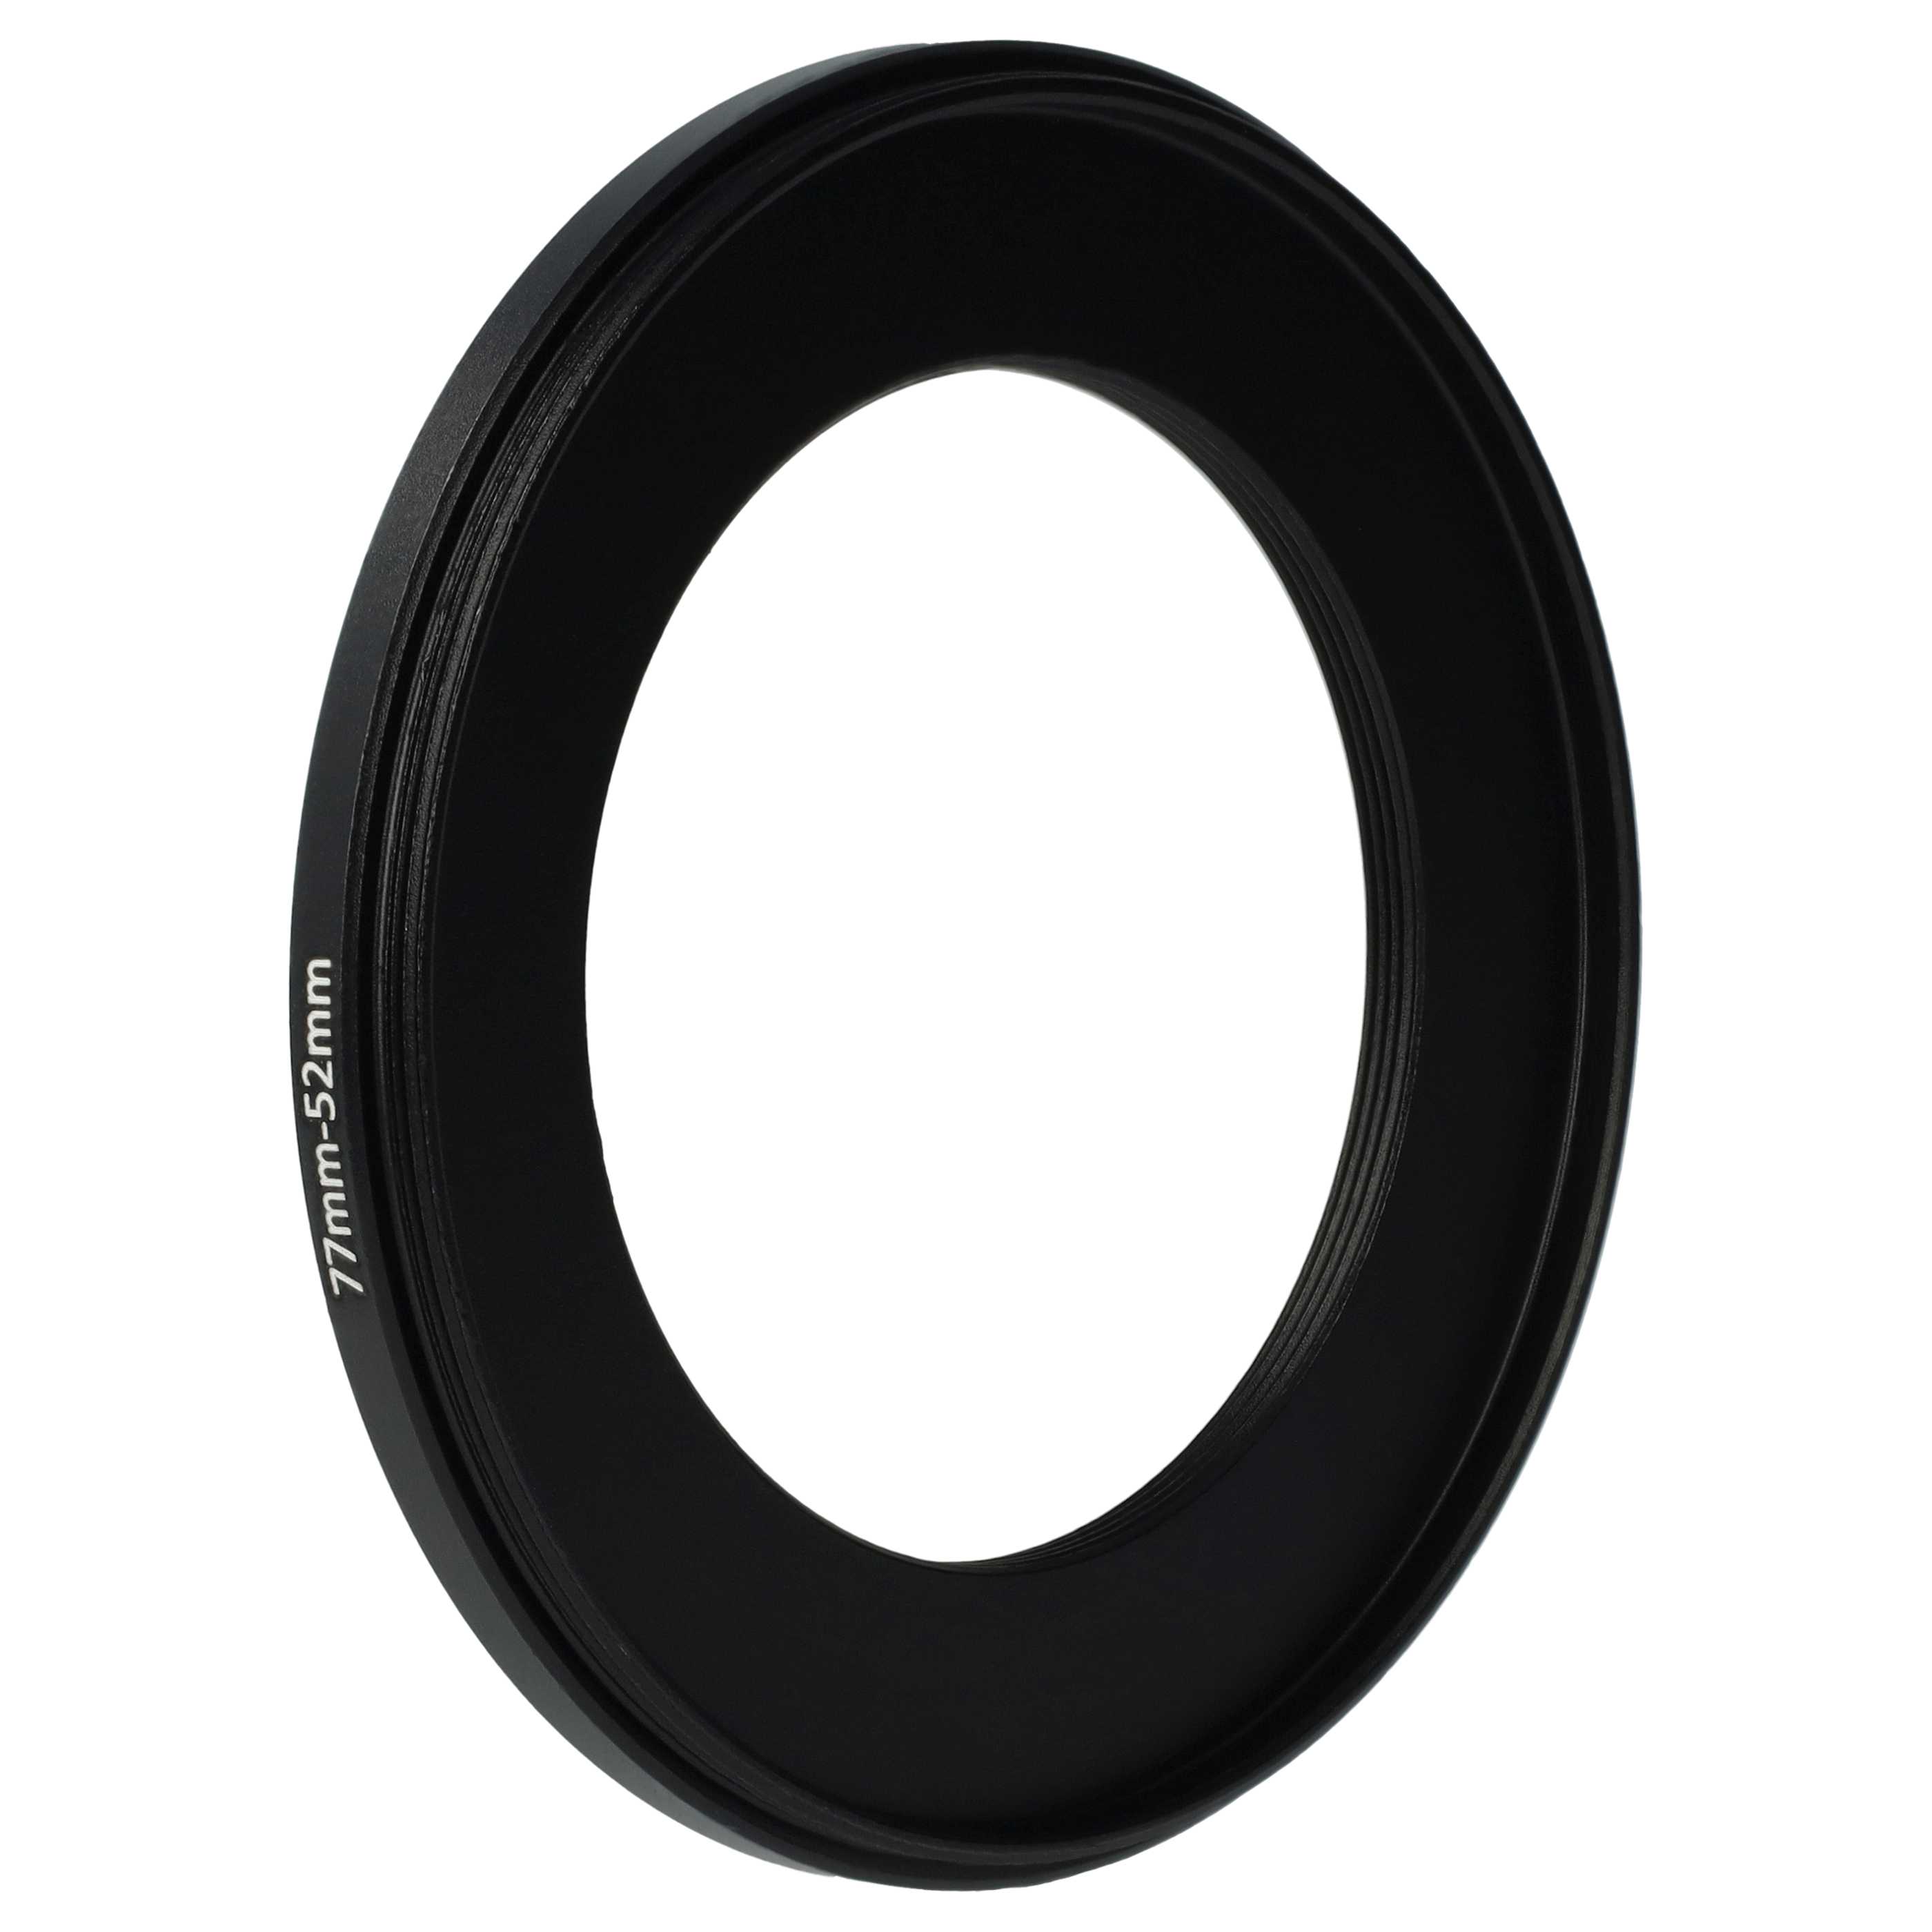 Step-Down Ring Adapter from 77 mm to 52 mm suitable for Camera Lens - Filter Adapter, metal